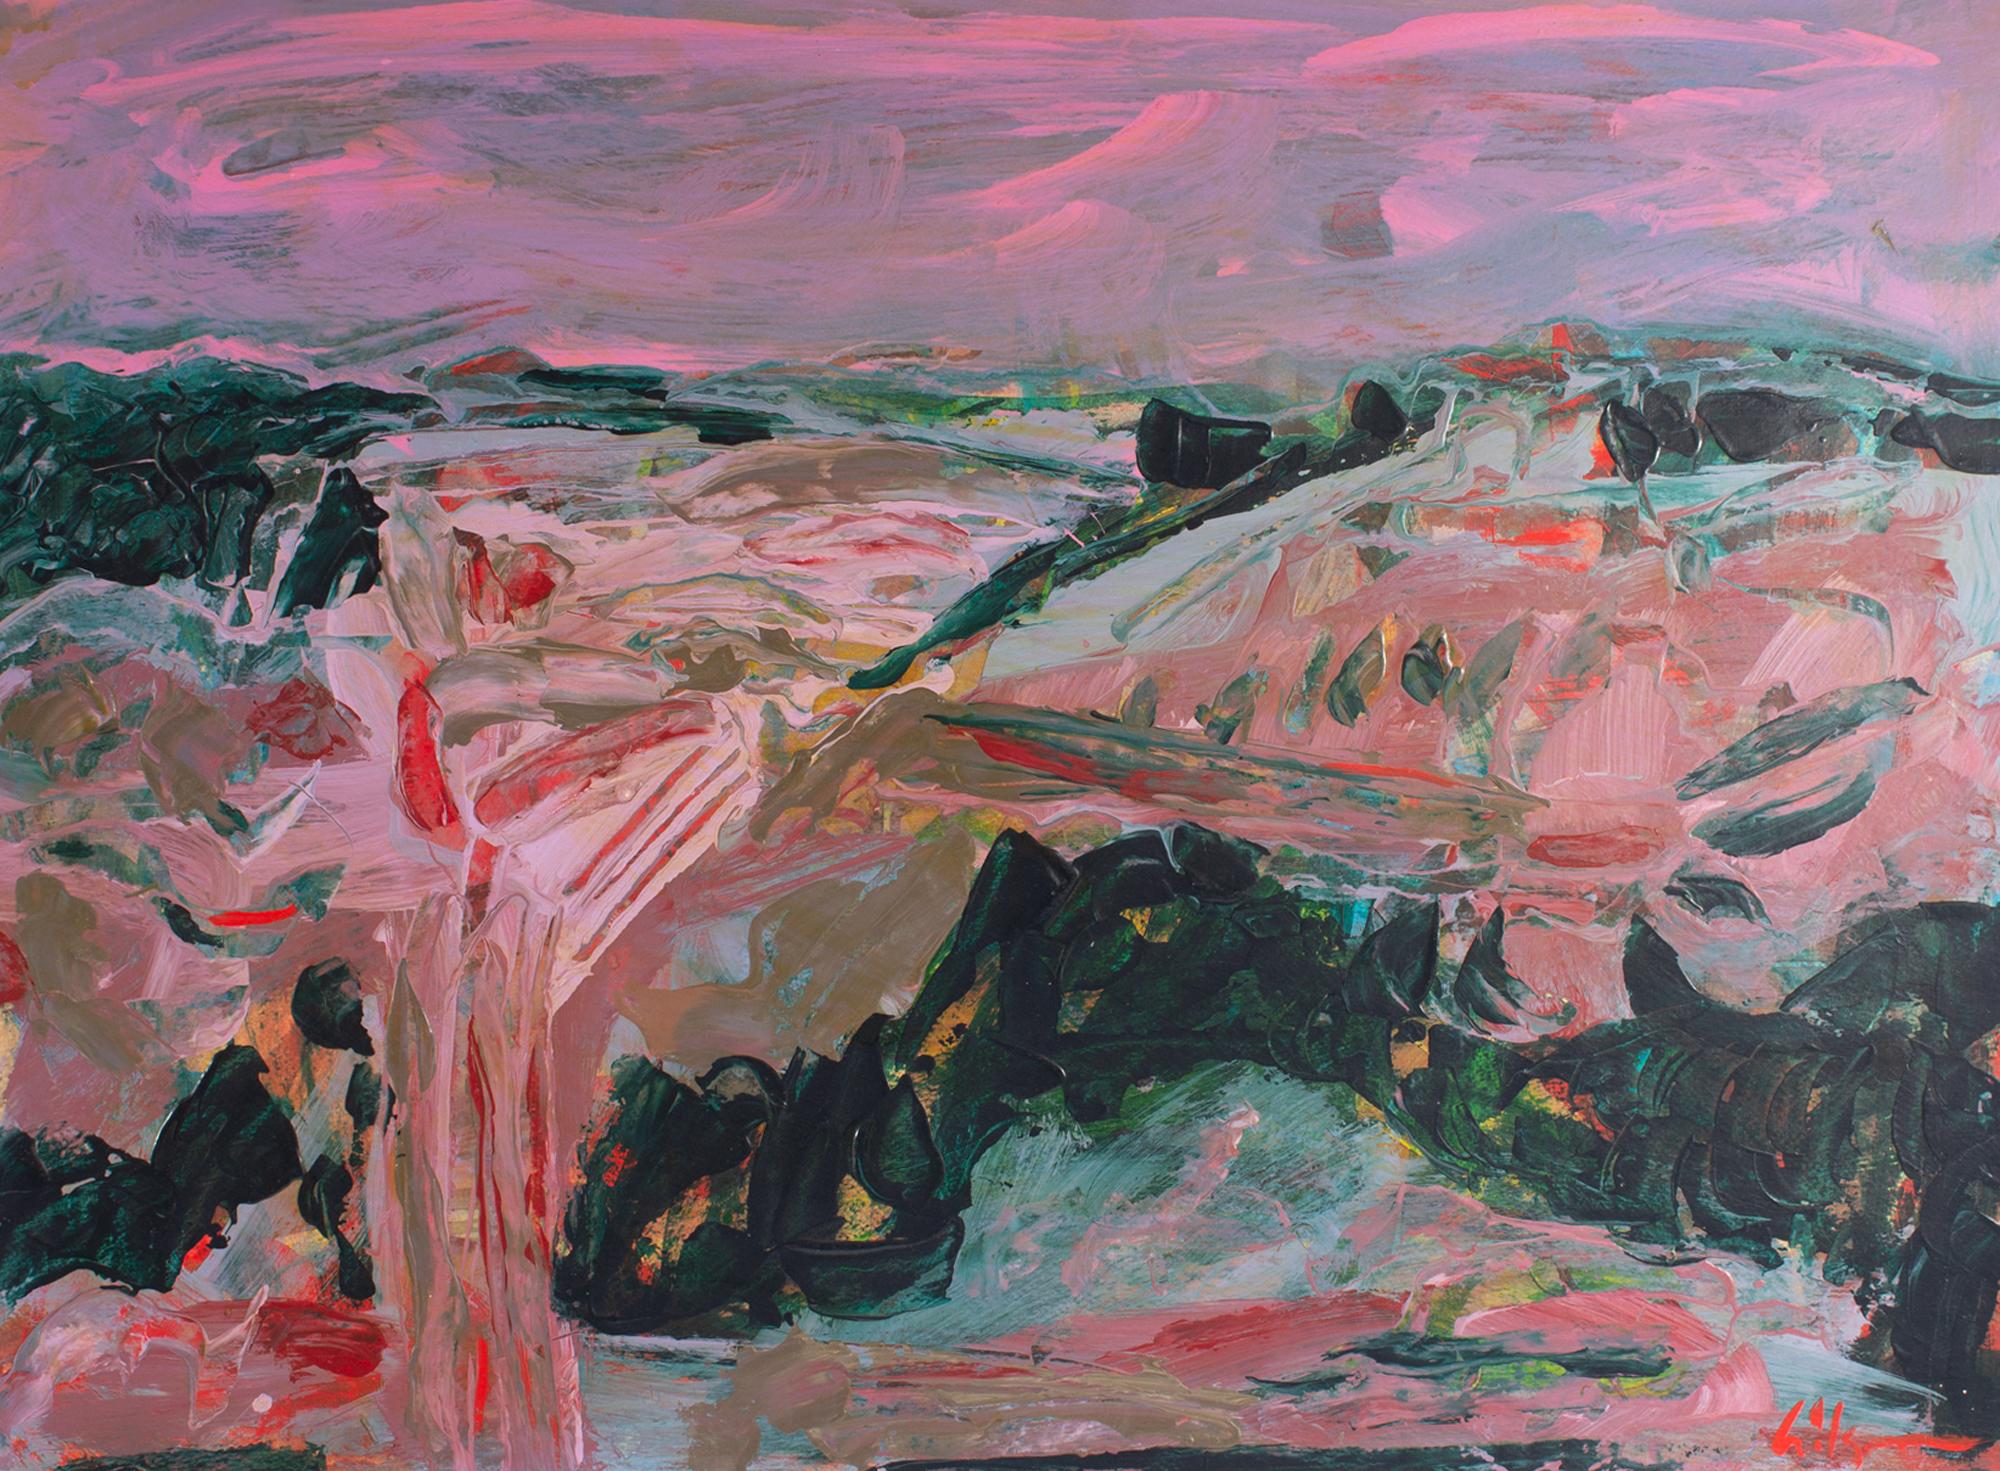 A 1980s acrylic on paper painting by the American artist Harry Hilson (1935-2004). This abstract work depicts a predominantly pink landscape dotted with dark green shrubs and trees all under a pink sky. Signed to the lower right, the painting is